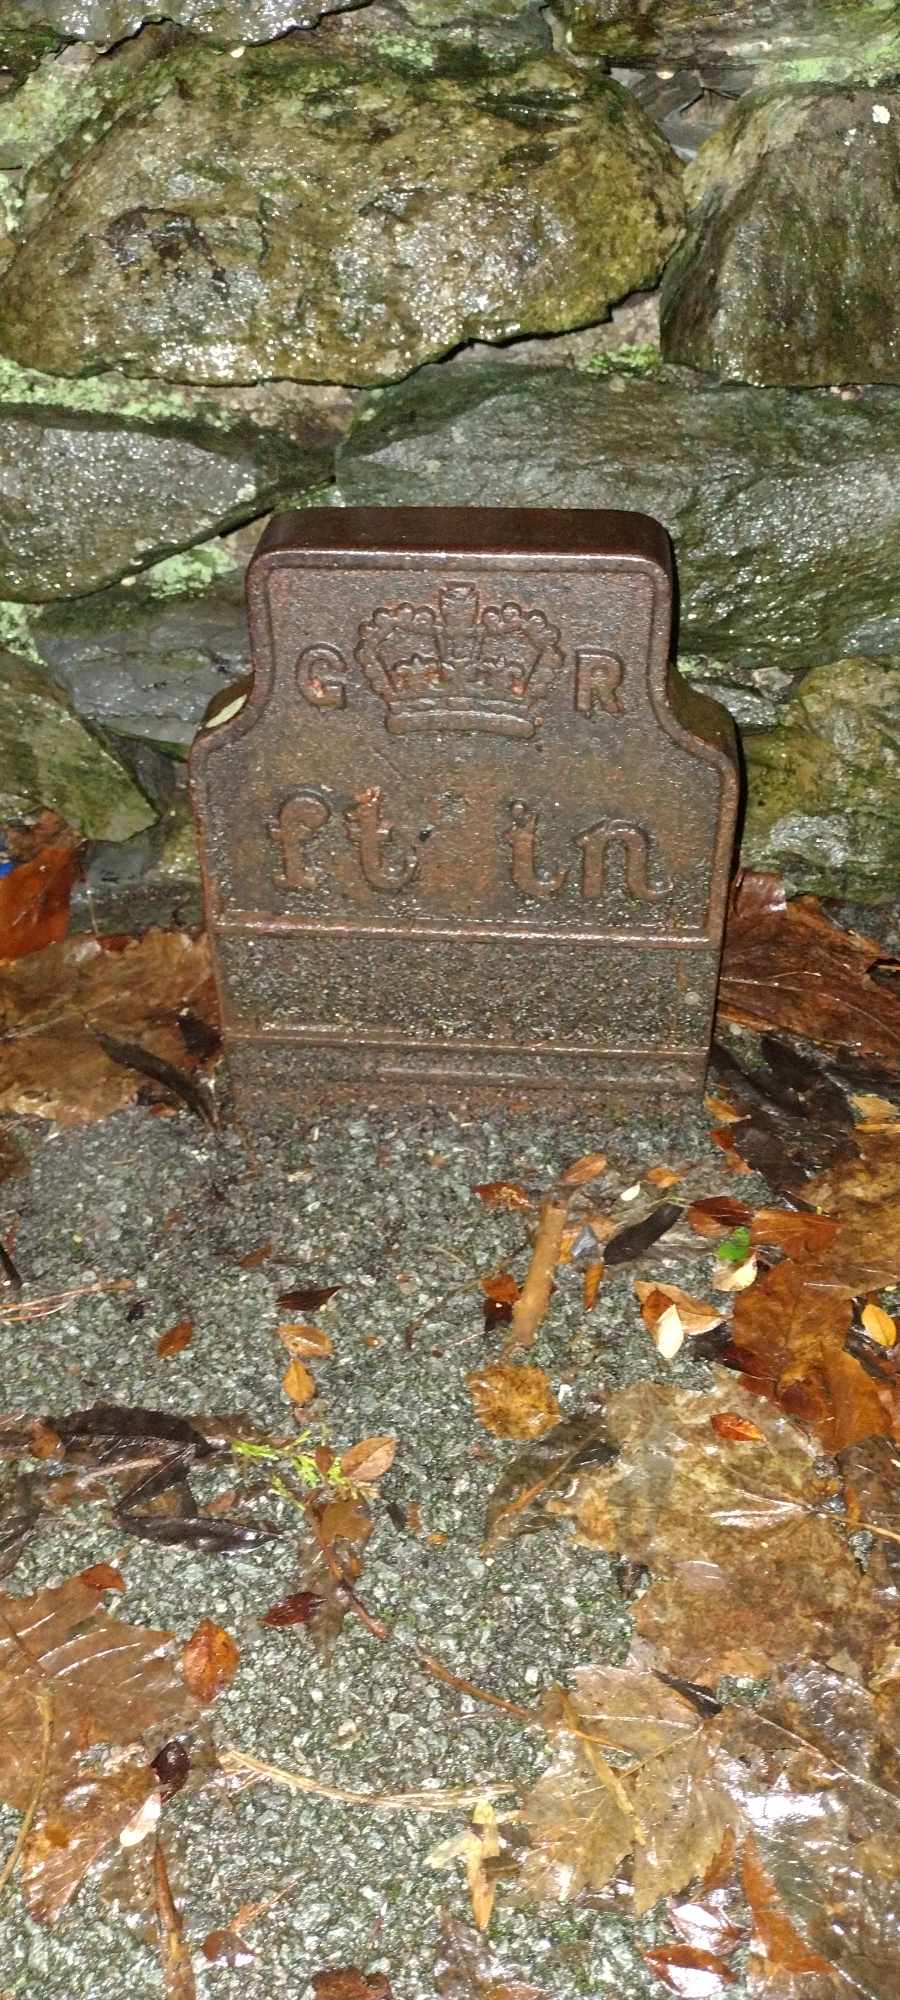 Telegraph cable marker post at Belsfield Court, Back Belsfield Road, Bowness, Cumbria by Lizzie Bear 